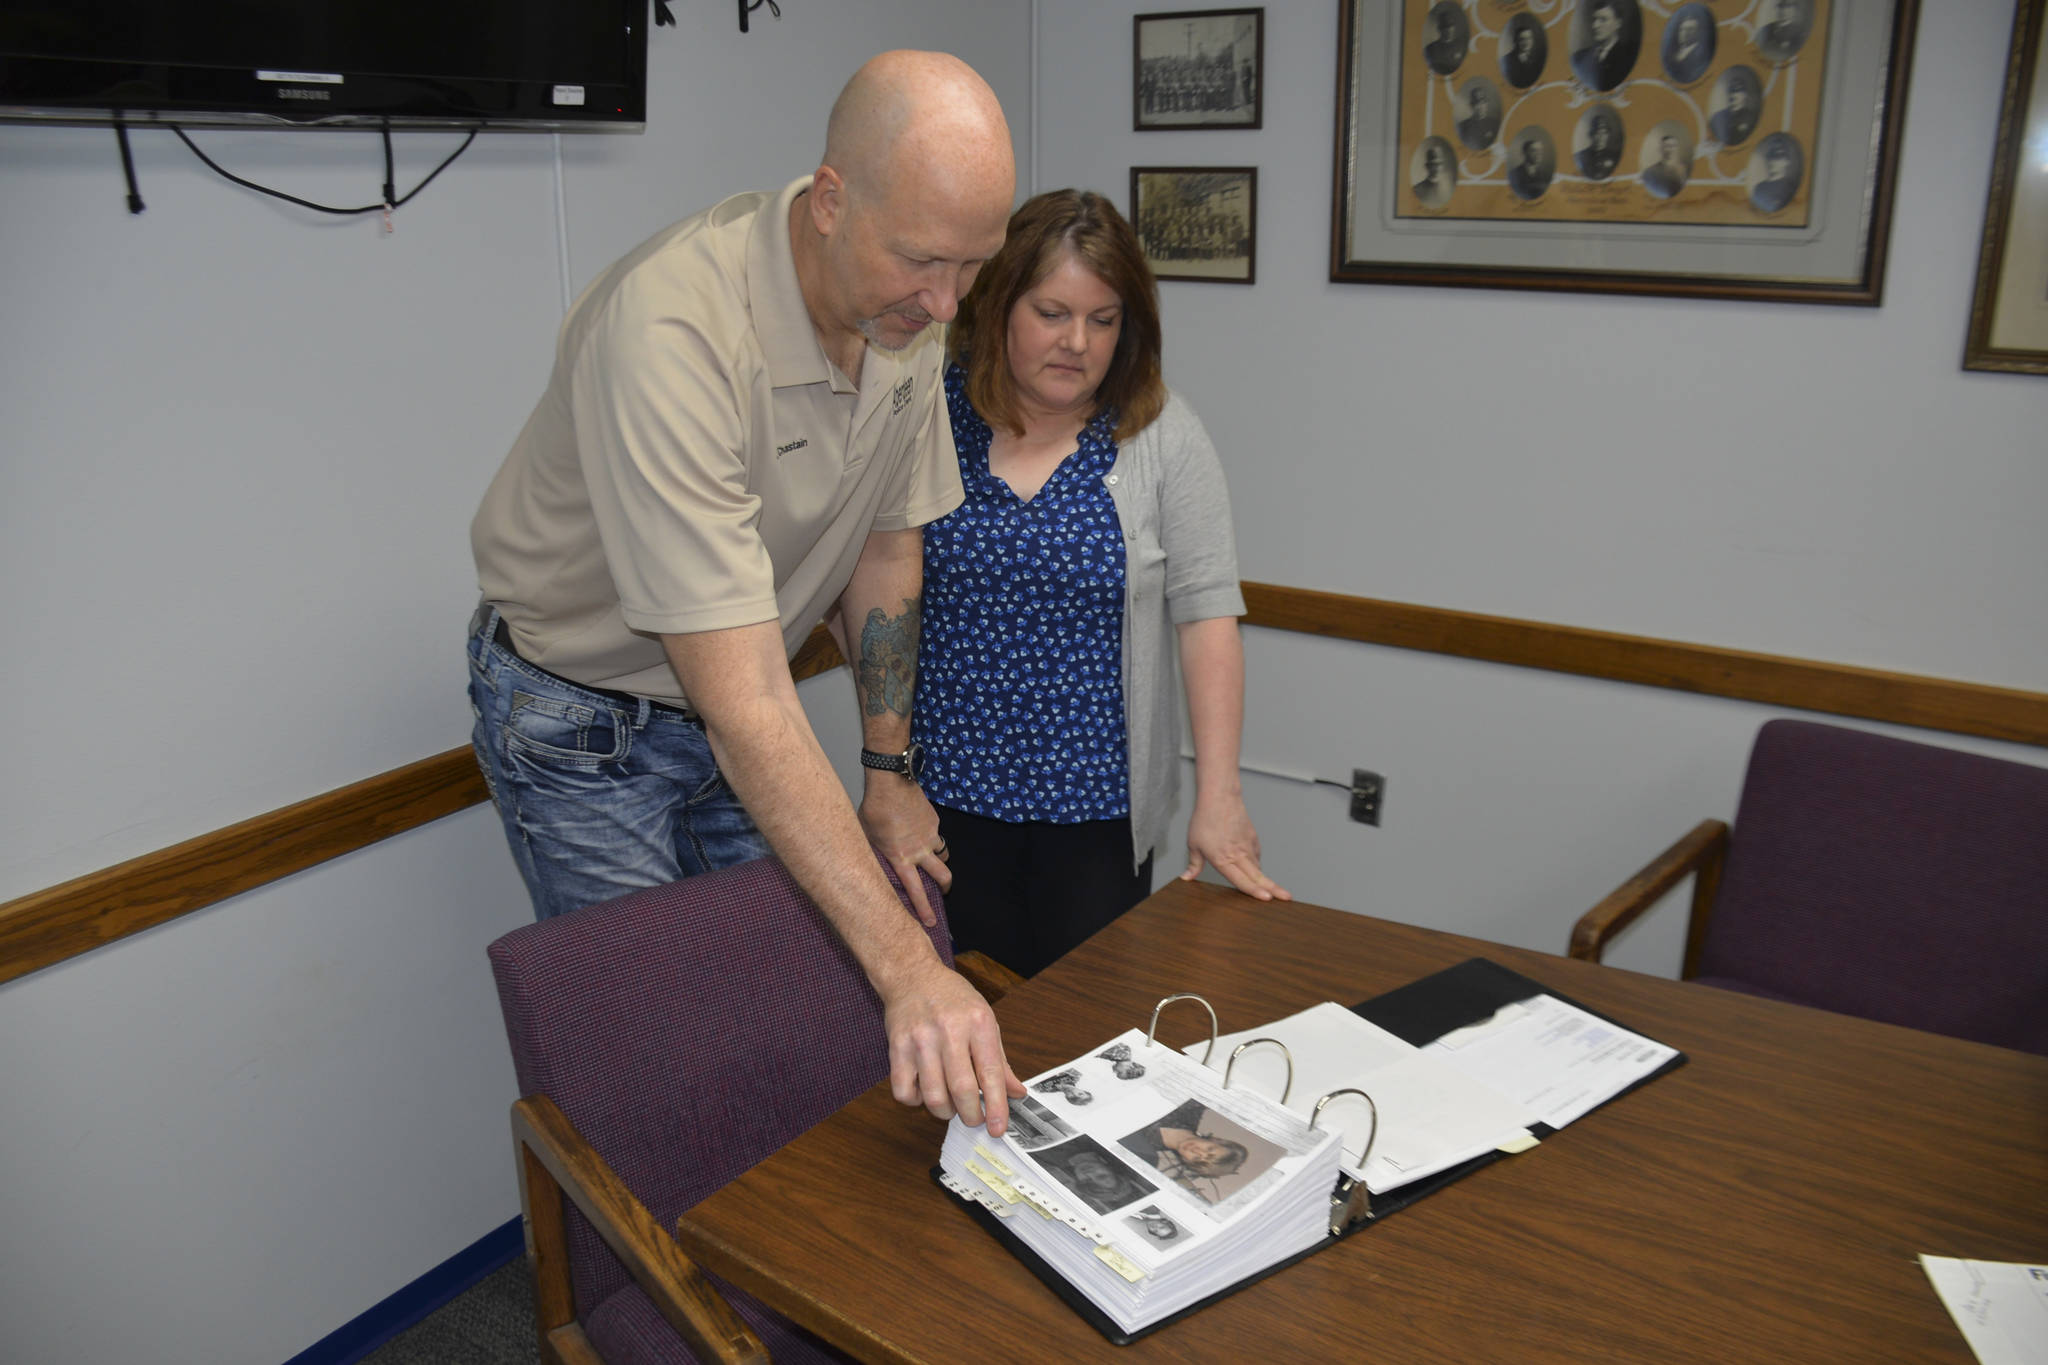 DAN HAMMOCK | GRAYS HARBOR NEWS GROUP                                Aberdeen Police Lt. C.J. Chastain and Det. Kristi Lougheed look through the case file of Laura Flink, who disappeared from Aberdeen 50 years ago. Flink’s remains have never been found.